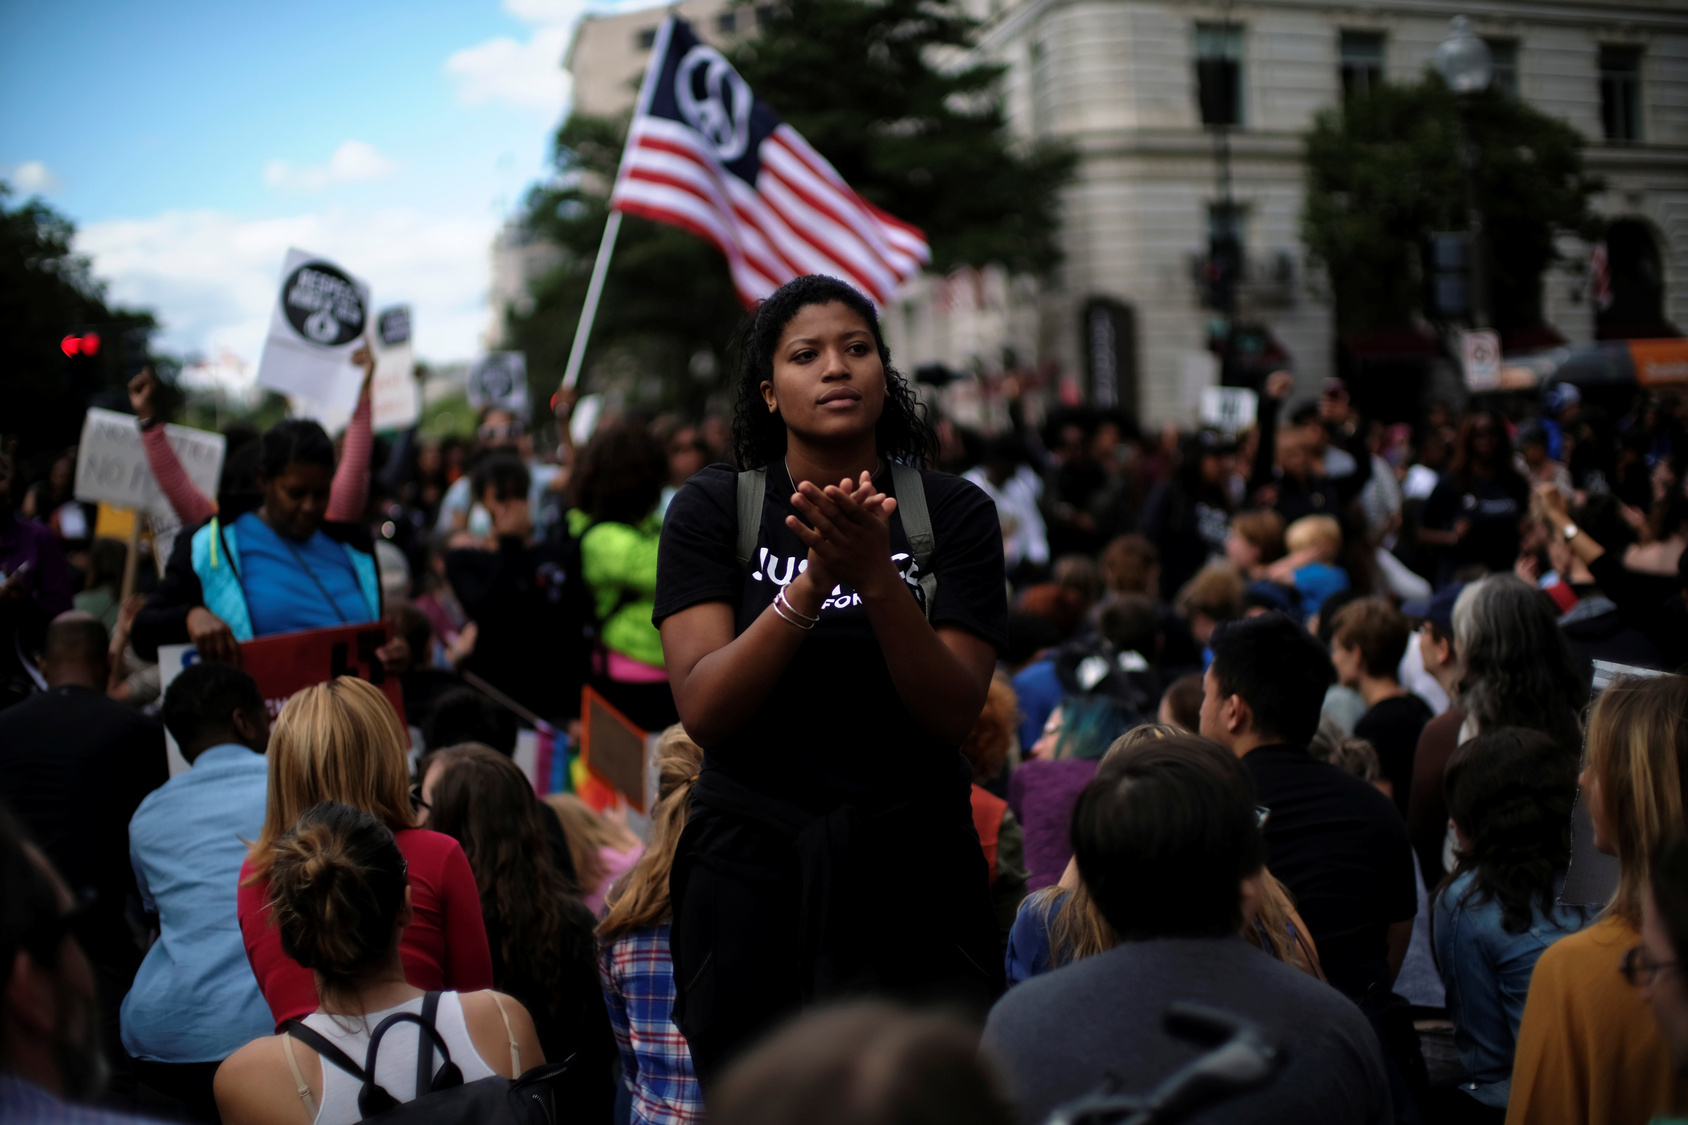 A Woman Applauds As Protesters Kneel On One Knee Outside The Trump International Hotel On Pennsylvania Avenue During The March For Racial Justice Calling For Racial Equity And Justice In Washington in September 30, 2017.